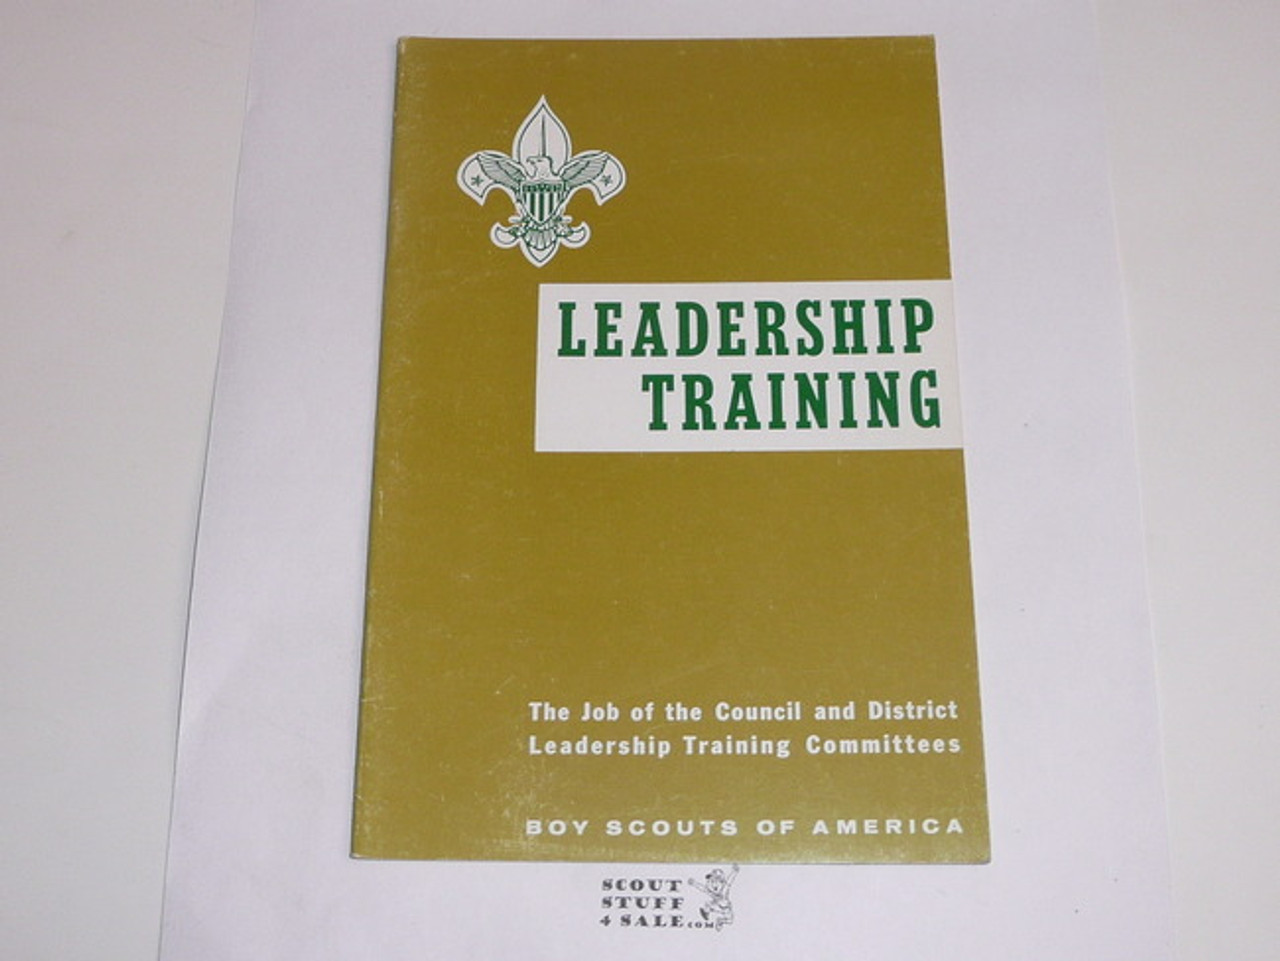 Leadership Training, The job of the Council and District Leadership Training Committees, 4-65 printing